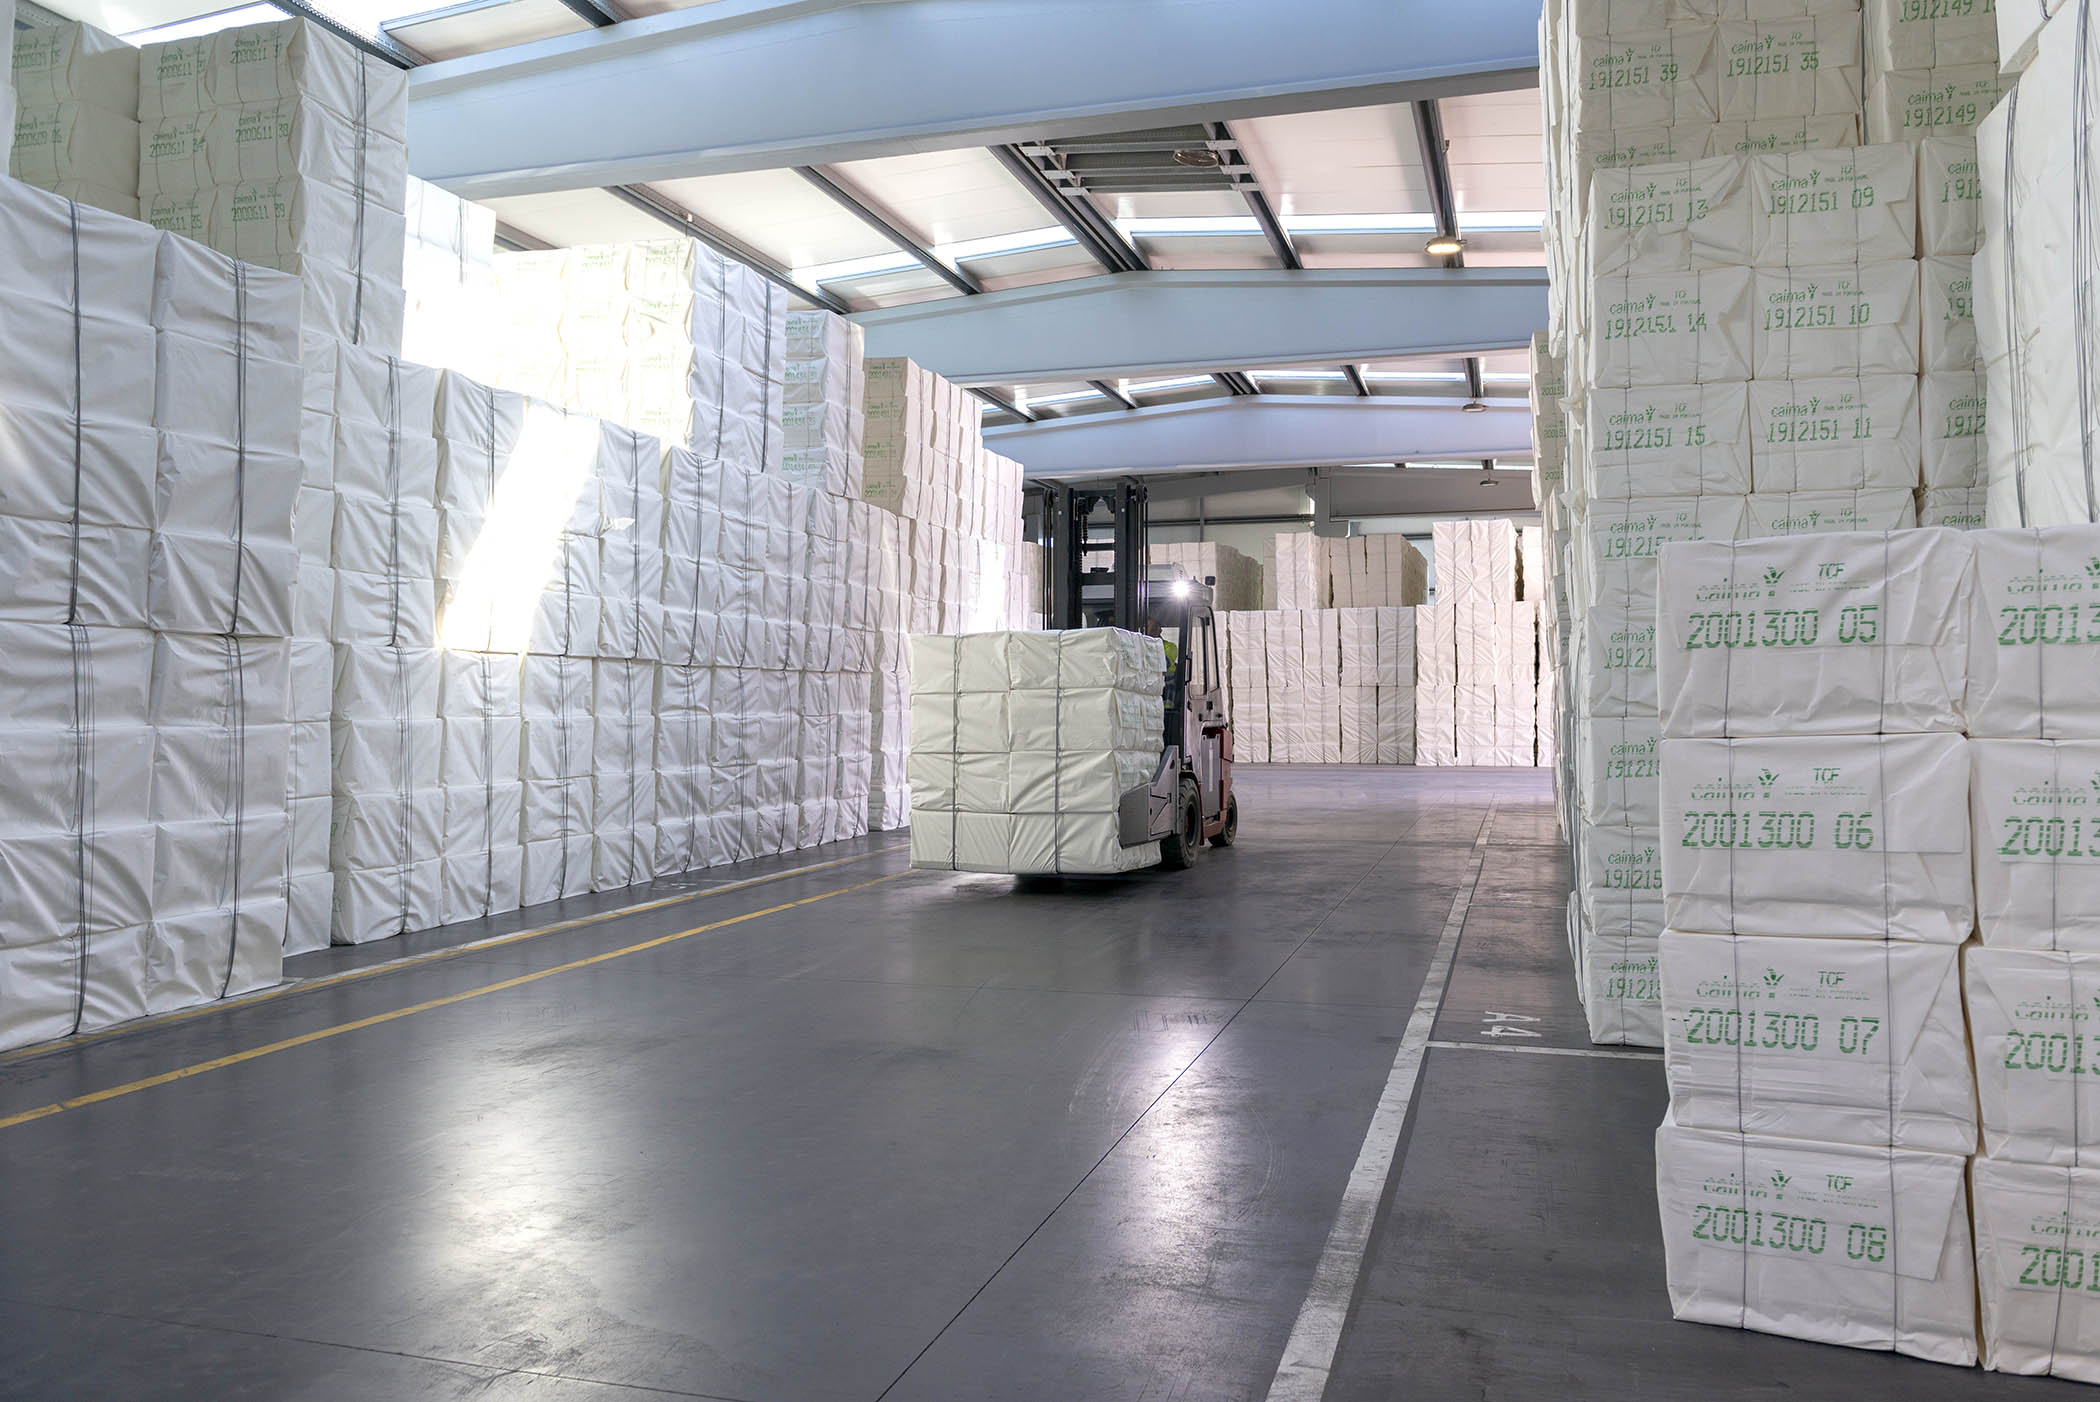 Sales of Altri’s pulp rise by 4% in 2019